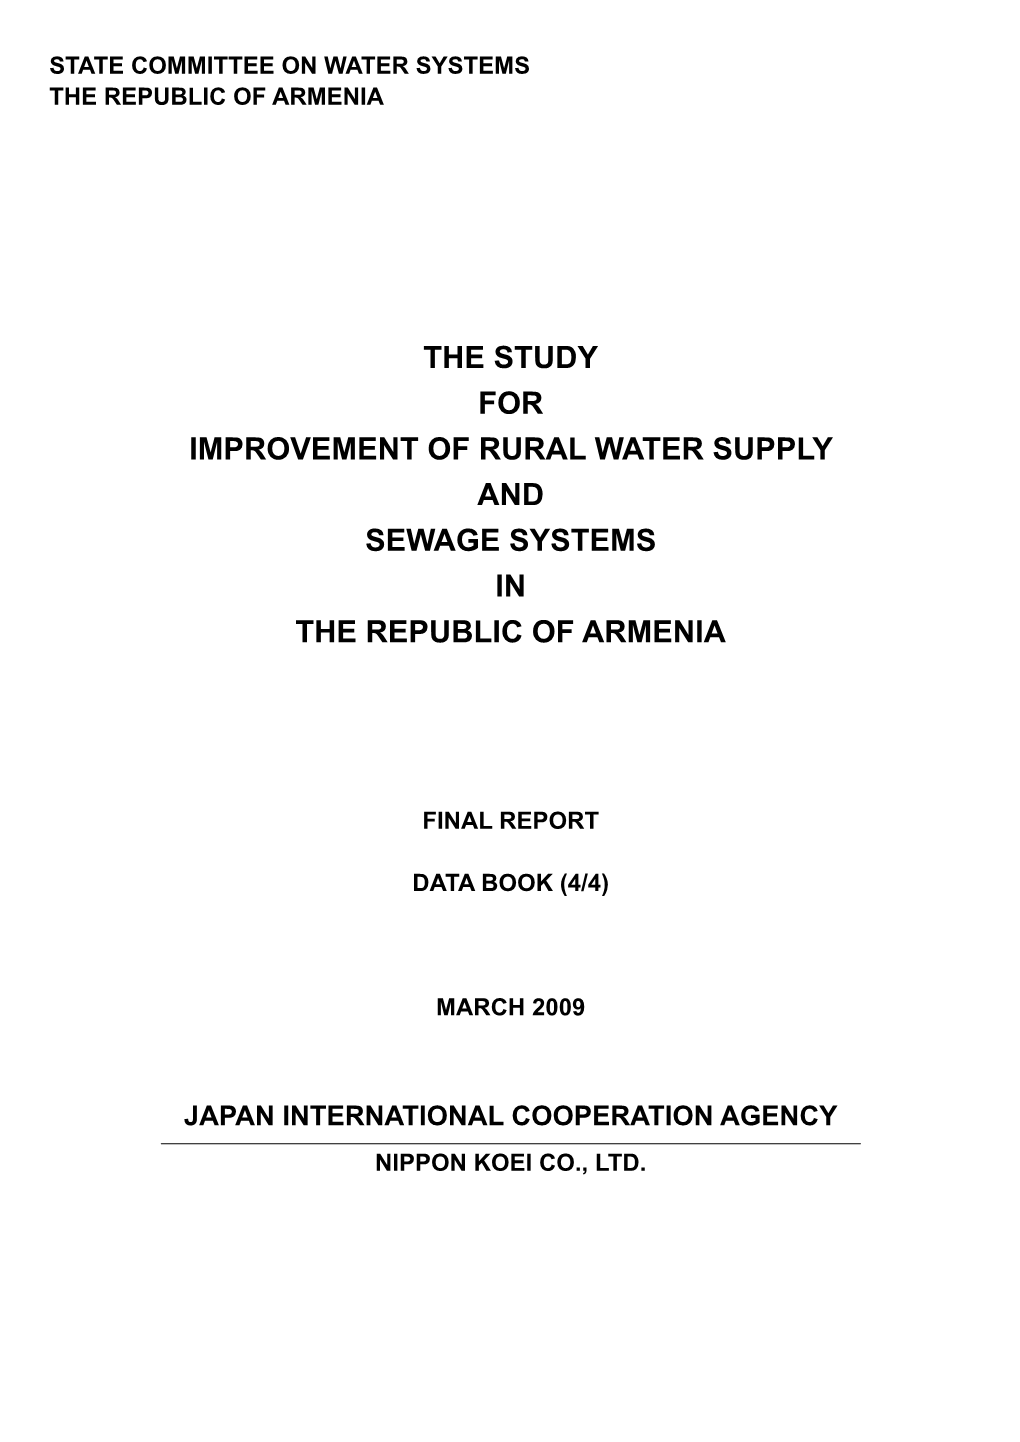 The Study for Improvement of Rural Water Supply and Sewage Systems in the Republic of Armenia